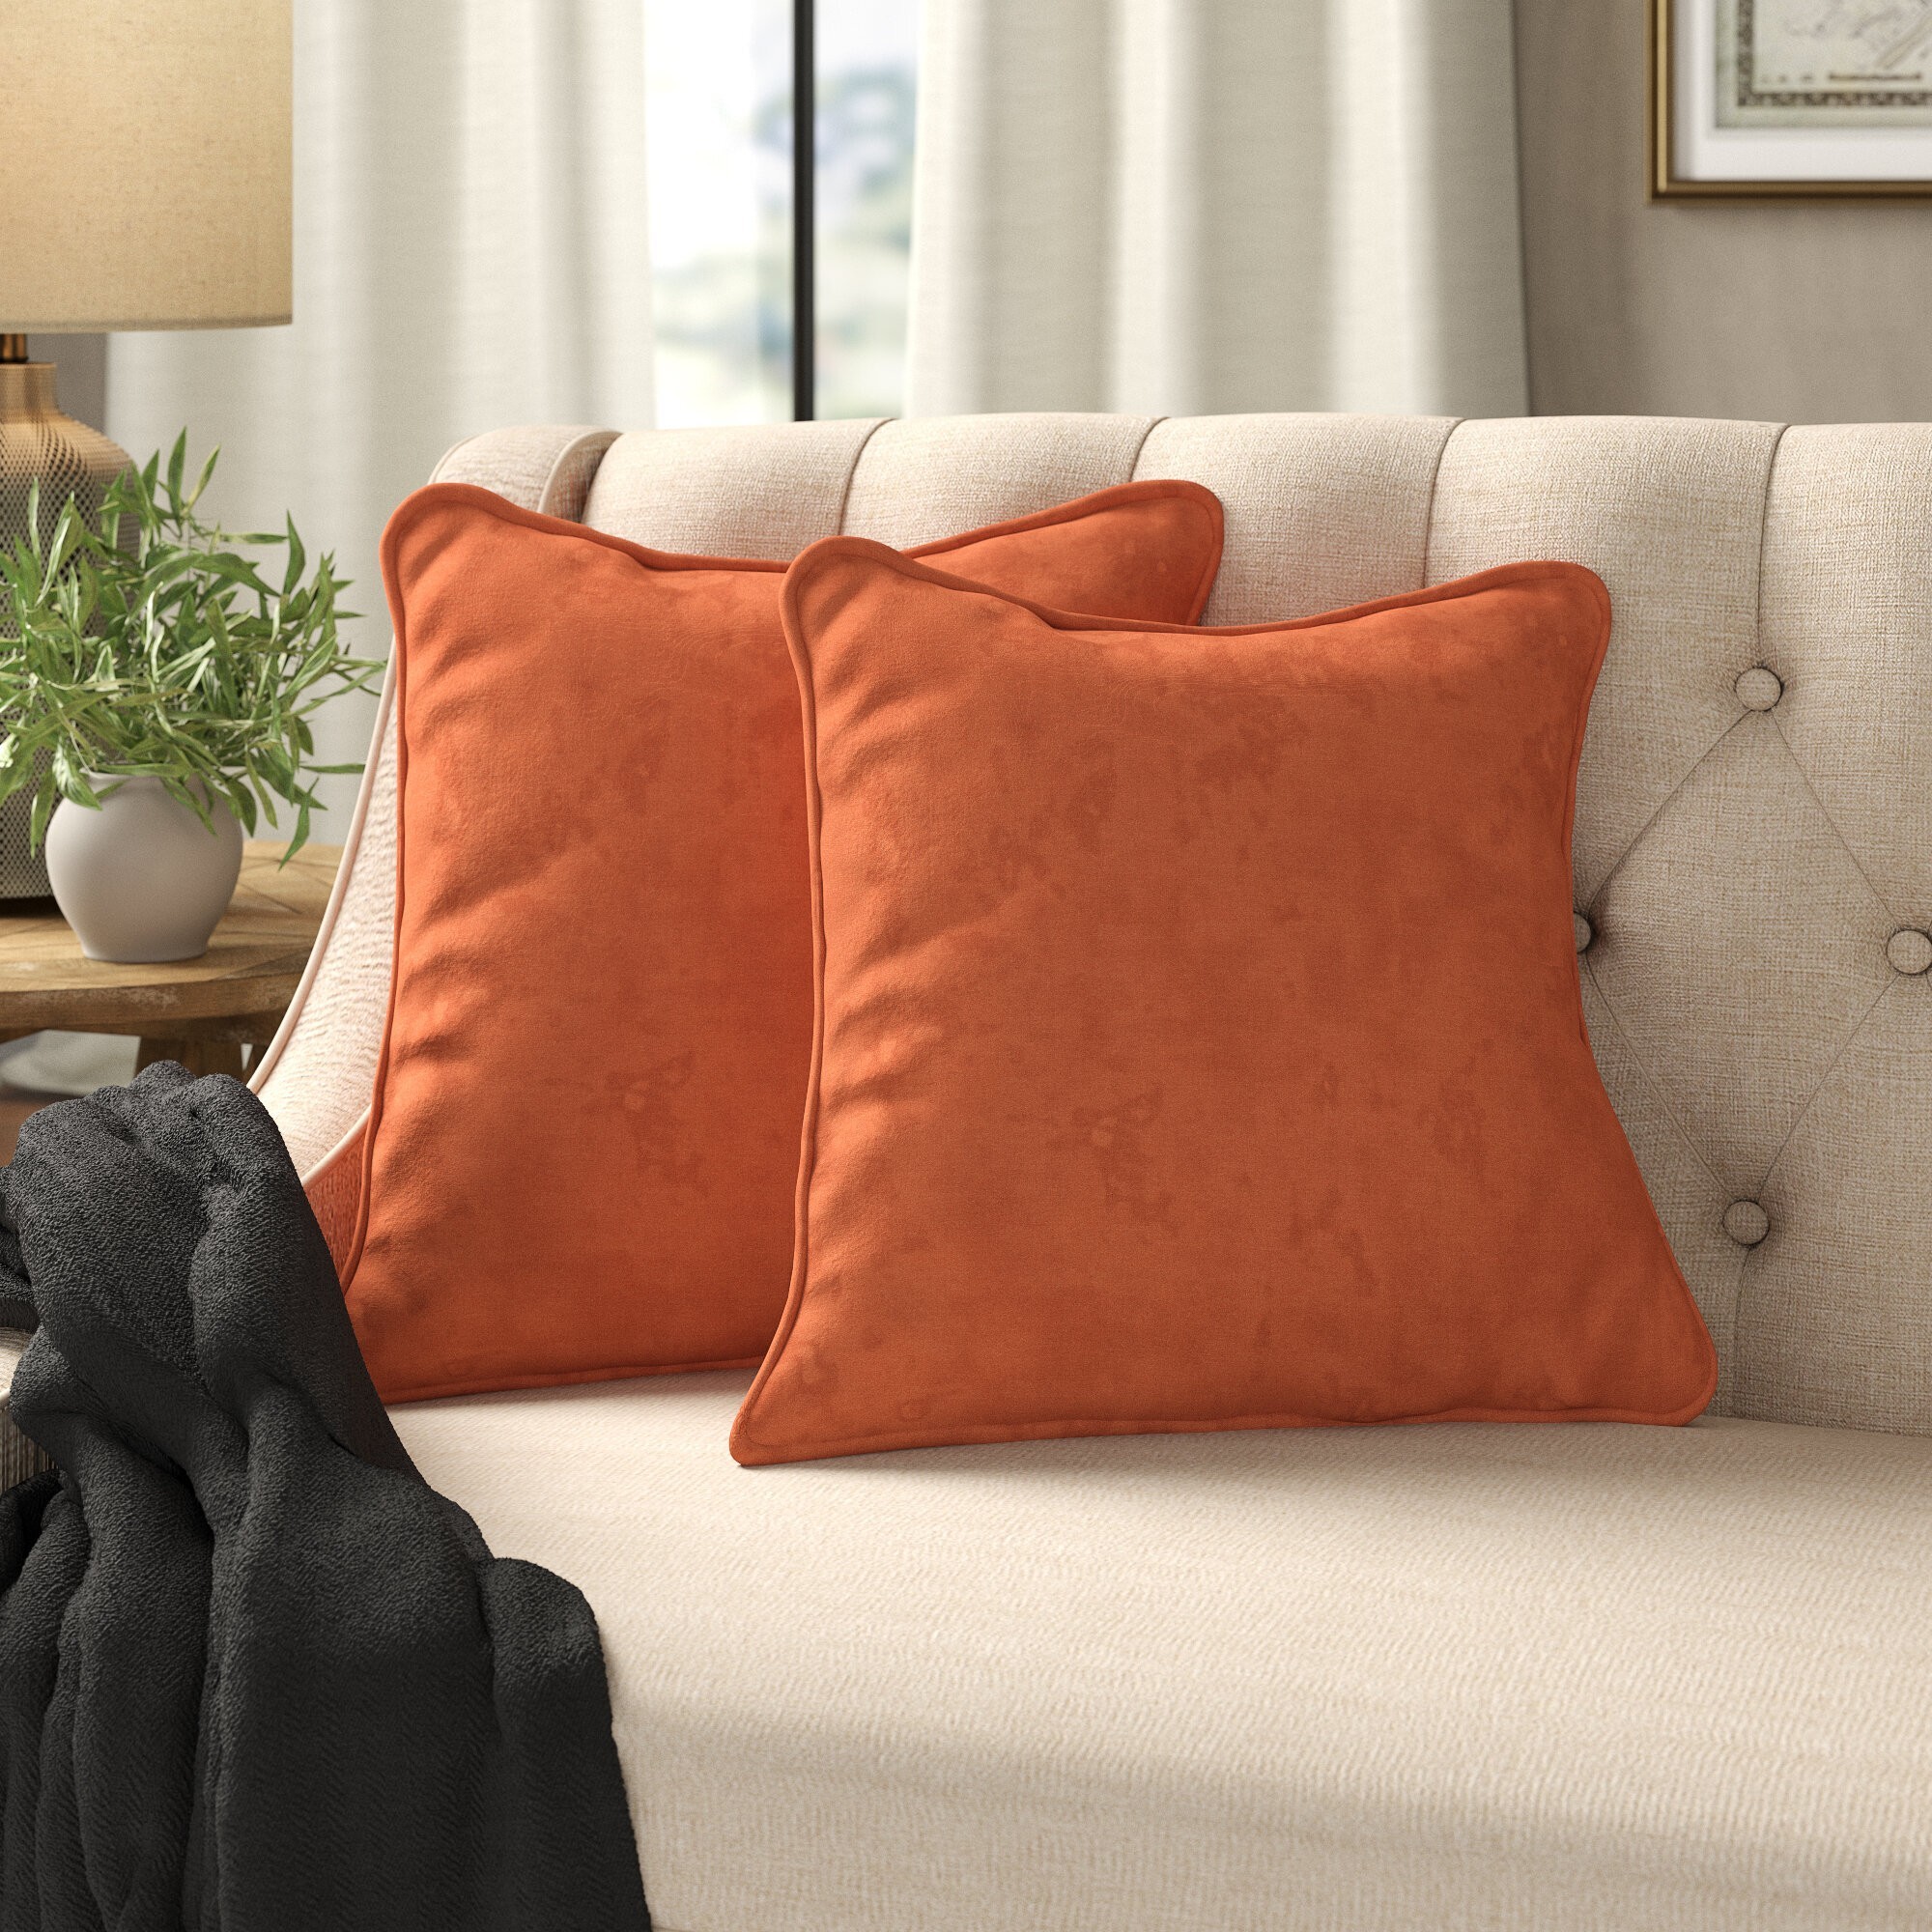 How To Choose Throw Pillows